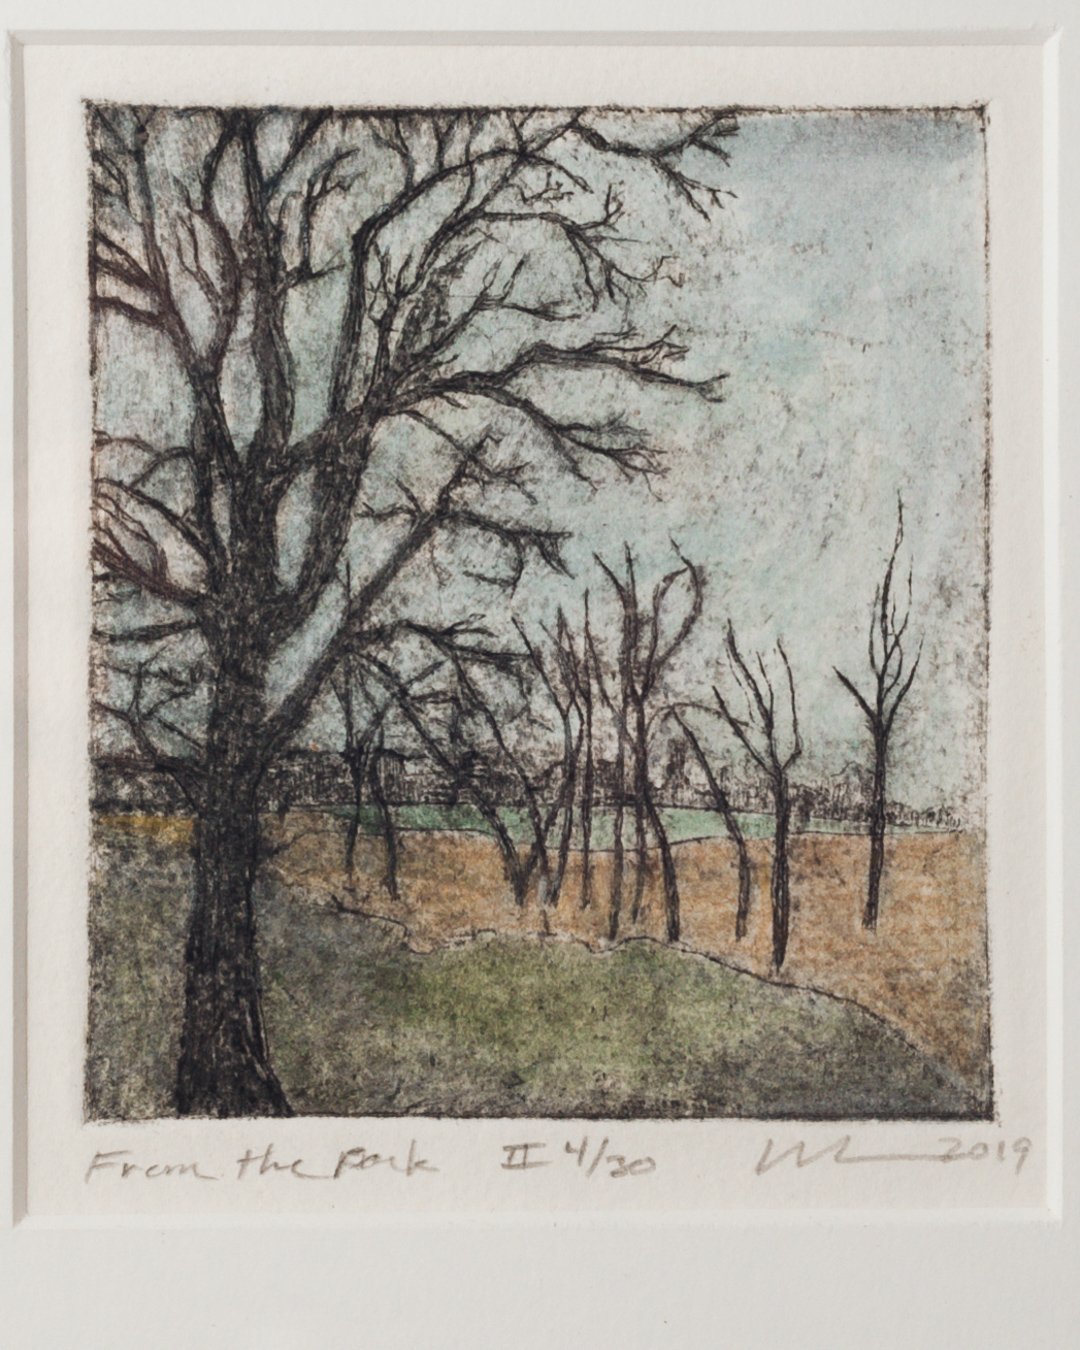 We have a wide selection of Laura Morton @lauramortonart original pieces in the shop. 
&ldquo;From The Park&rdquo; is an original watercolor etching, framed archivally.

Laura utilizes her original etching plates to print, by hand, individual art pie